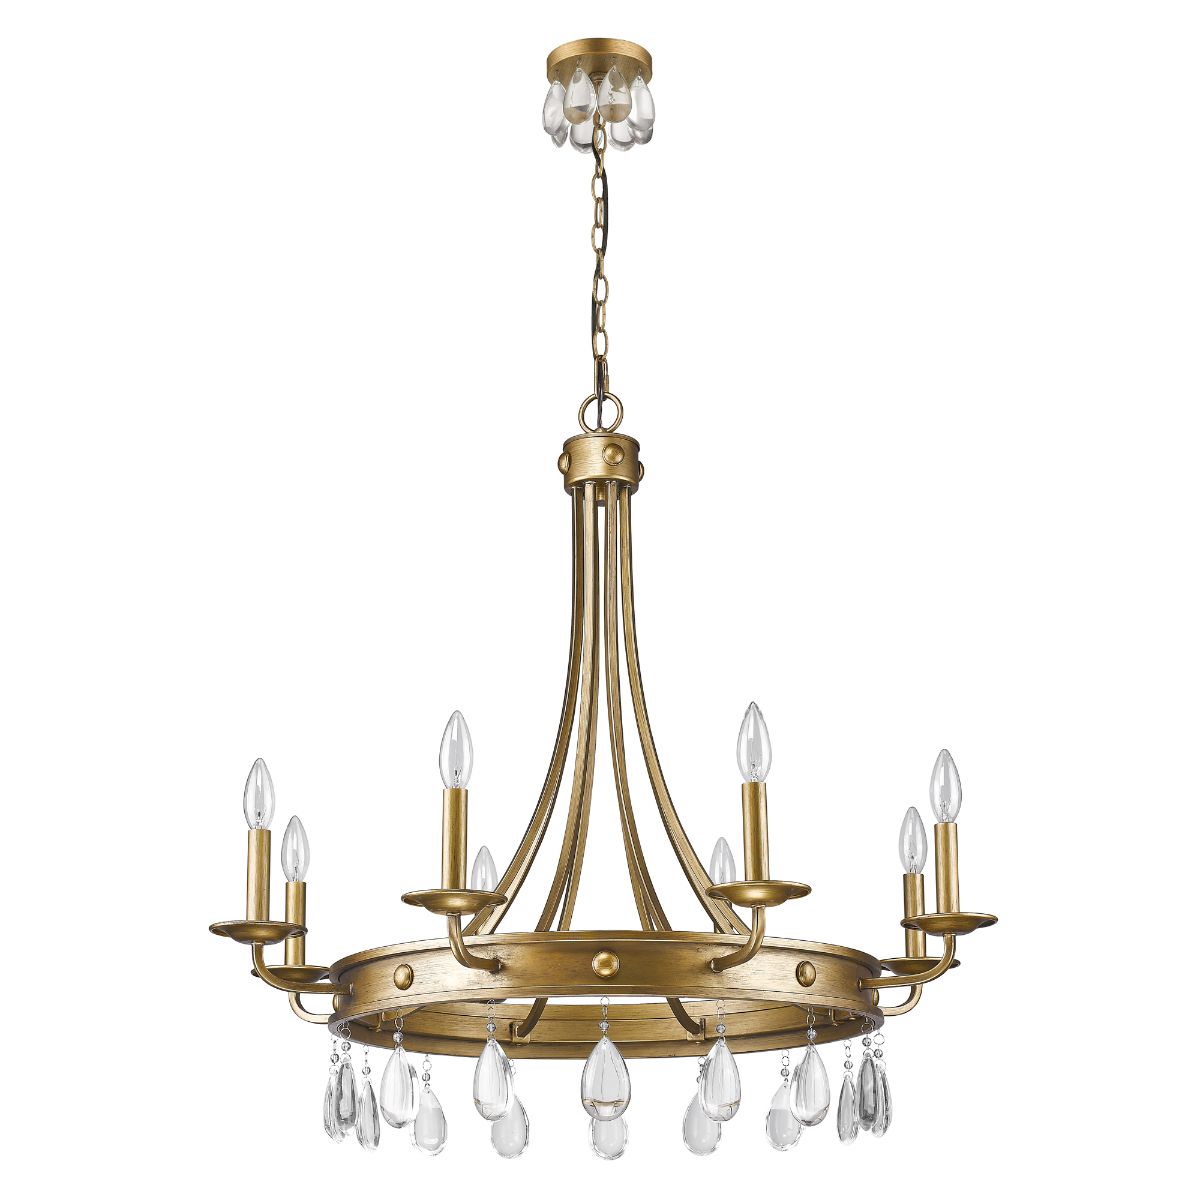 Krista 32 in. 8 Lights Chandelier with Crystal Accents and Studded Antique Gold Bands